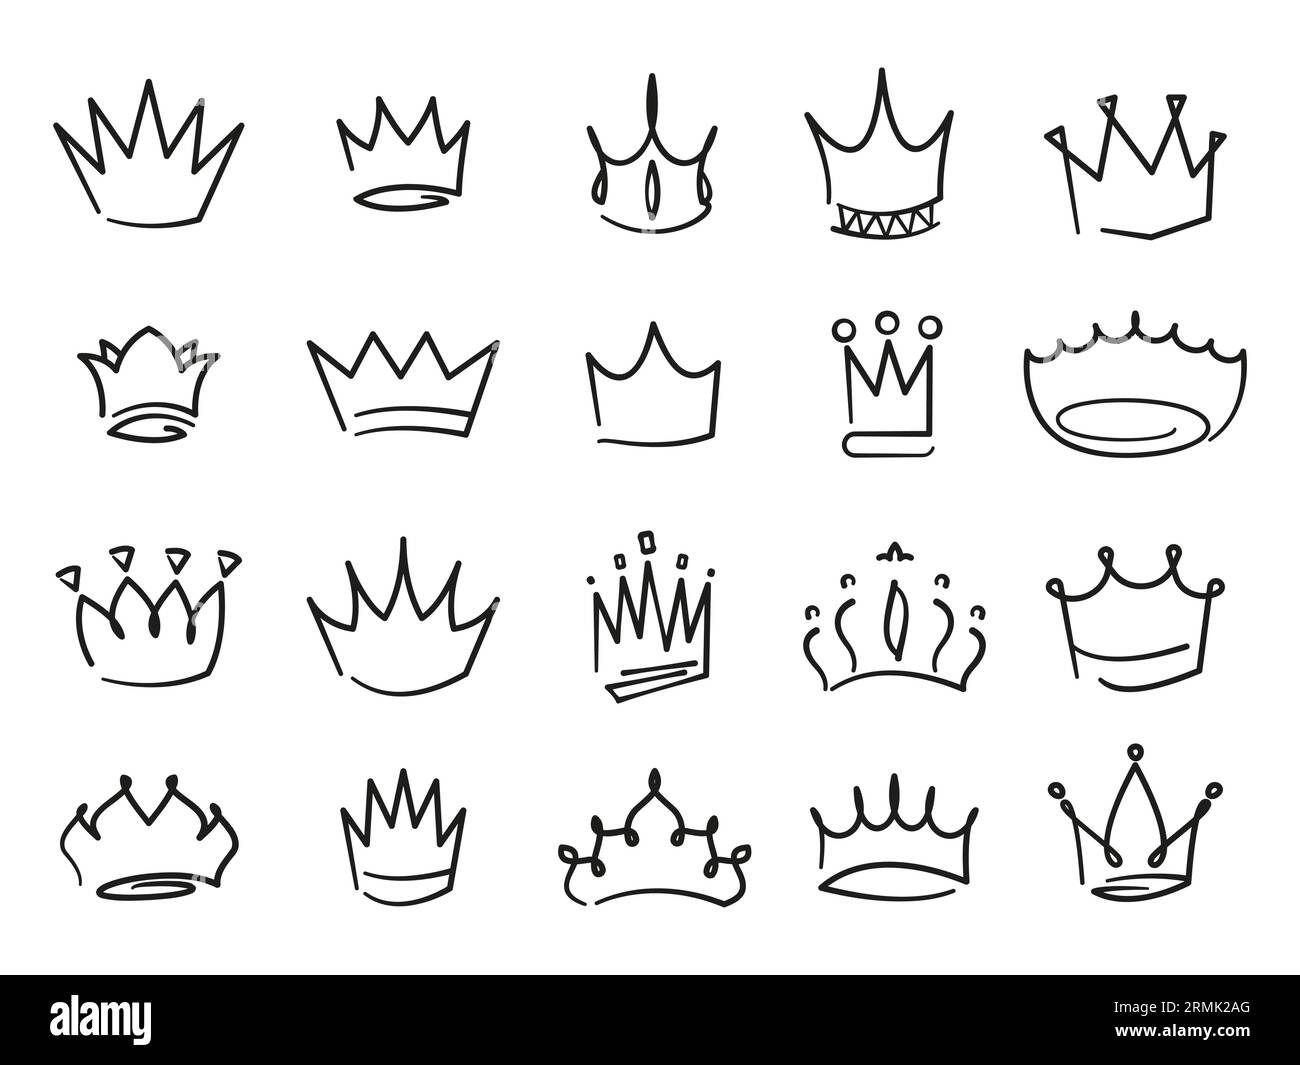 Doodle crowns. Medieval royal crowns with inscriptions and calligraphy, hand drawn luxury jewel monarch icons for logo design. Vector set of medieval queen royal illustration Stock Vector